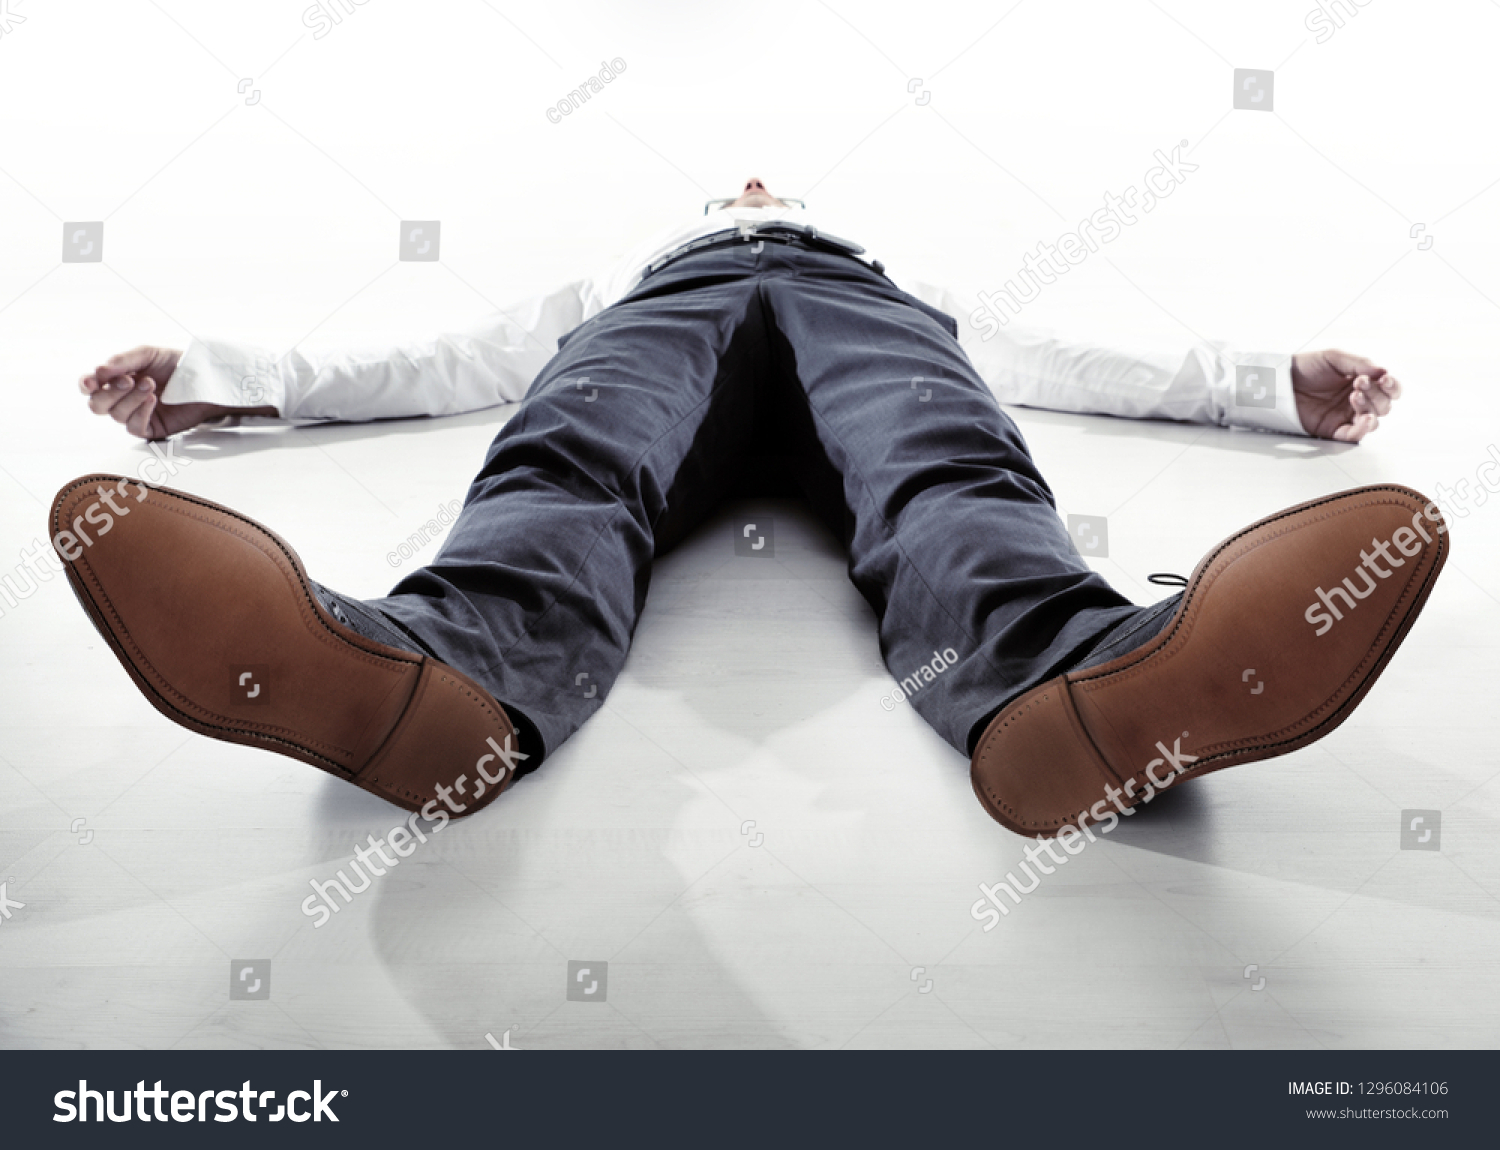 Businessman or office worker lying fainted on the floor #1296084106